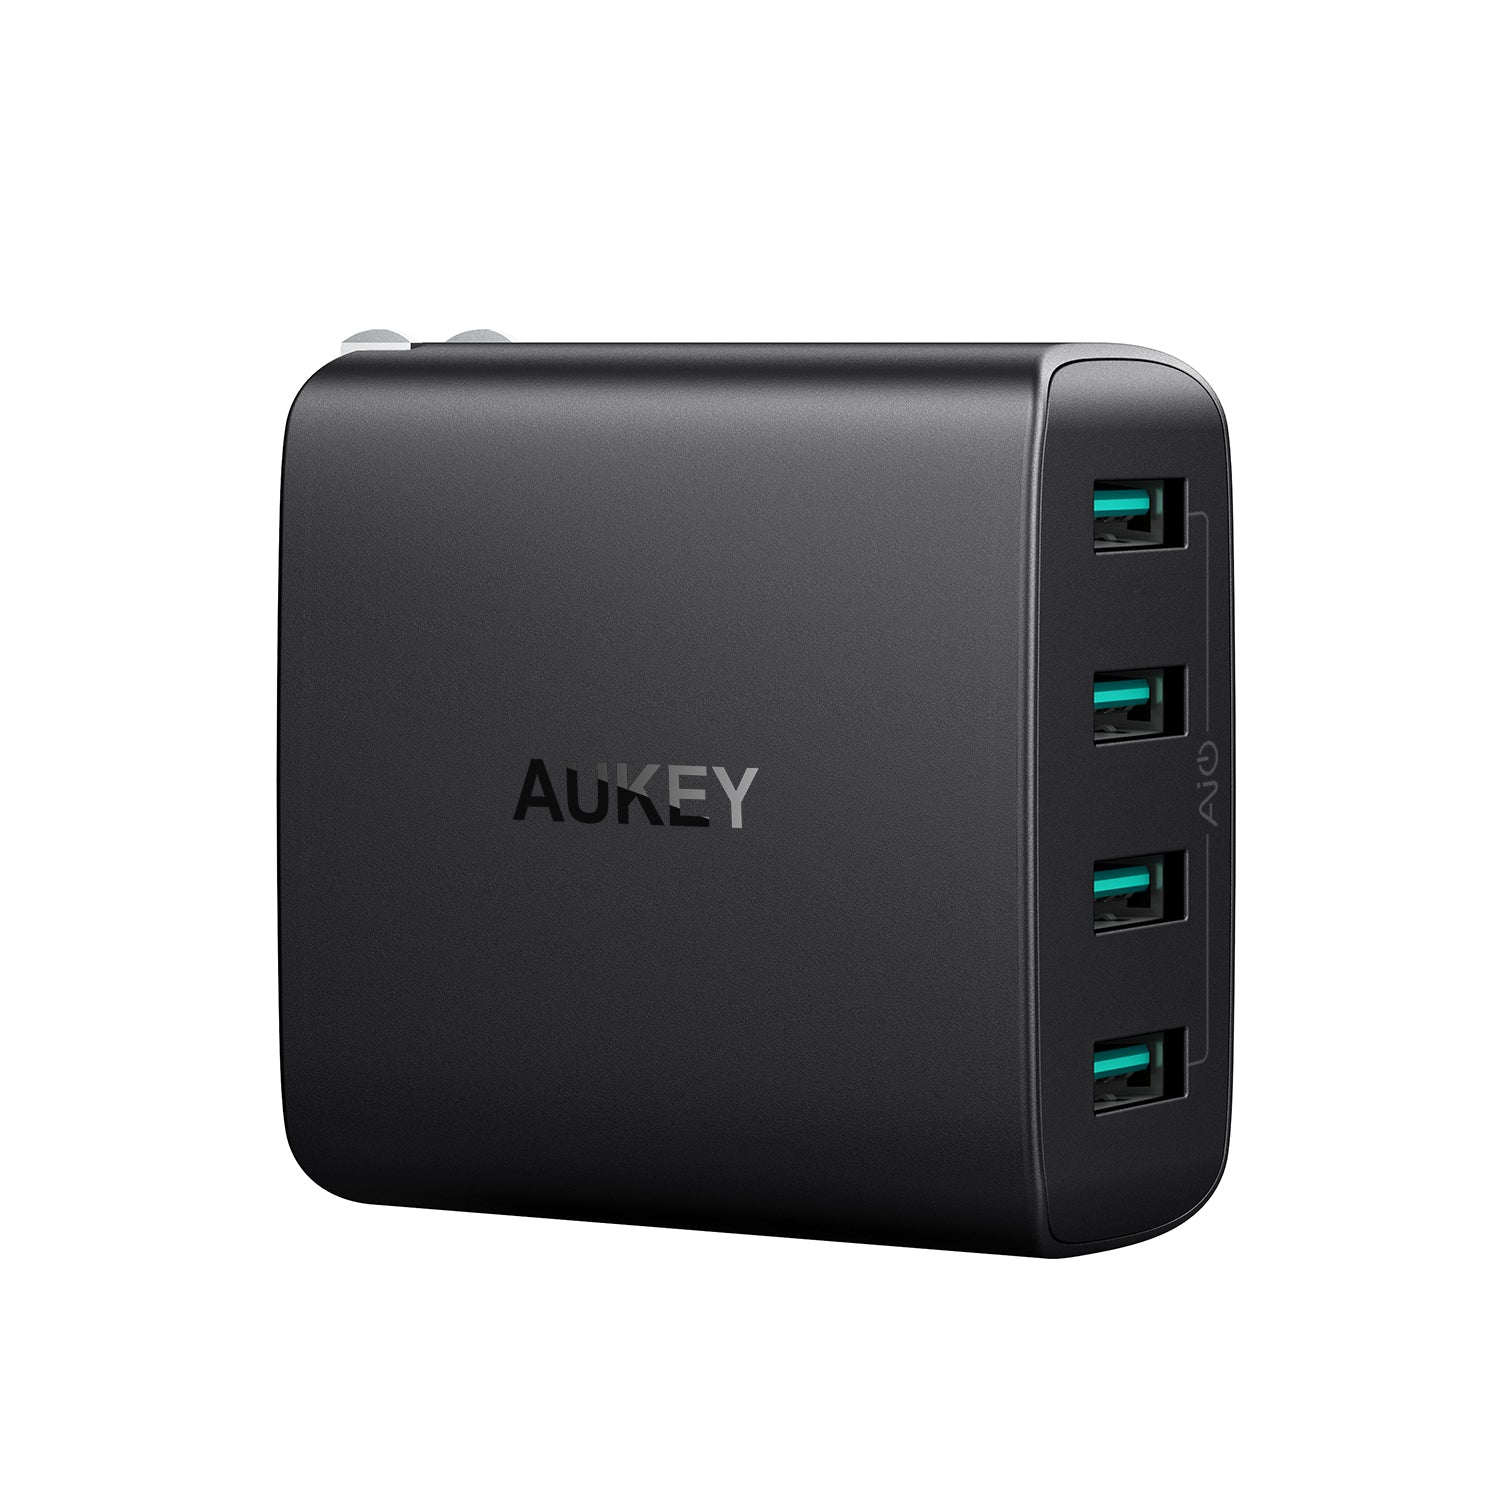 AUKEY USB Wall Charger 4 Ports with Foldable Plug